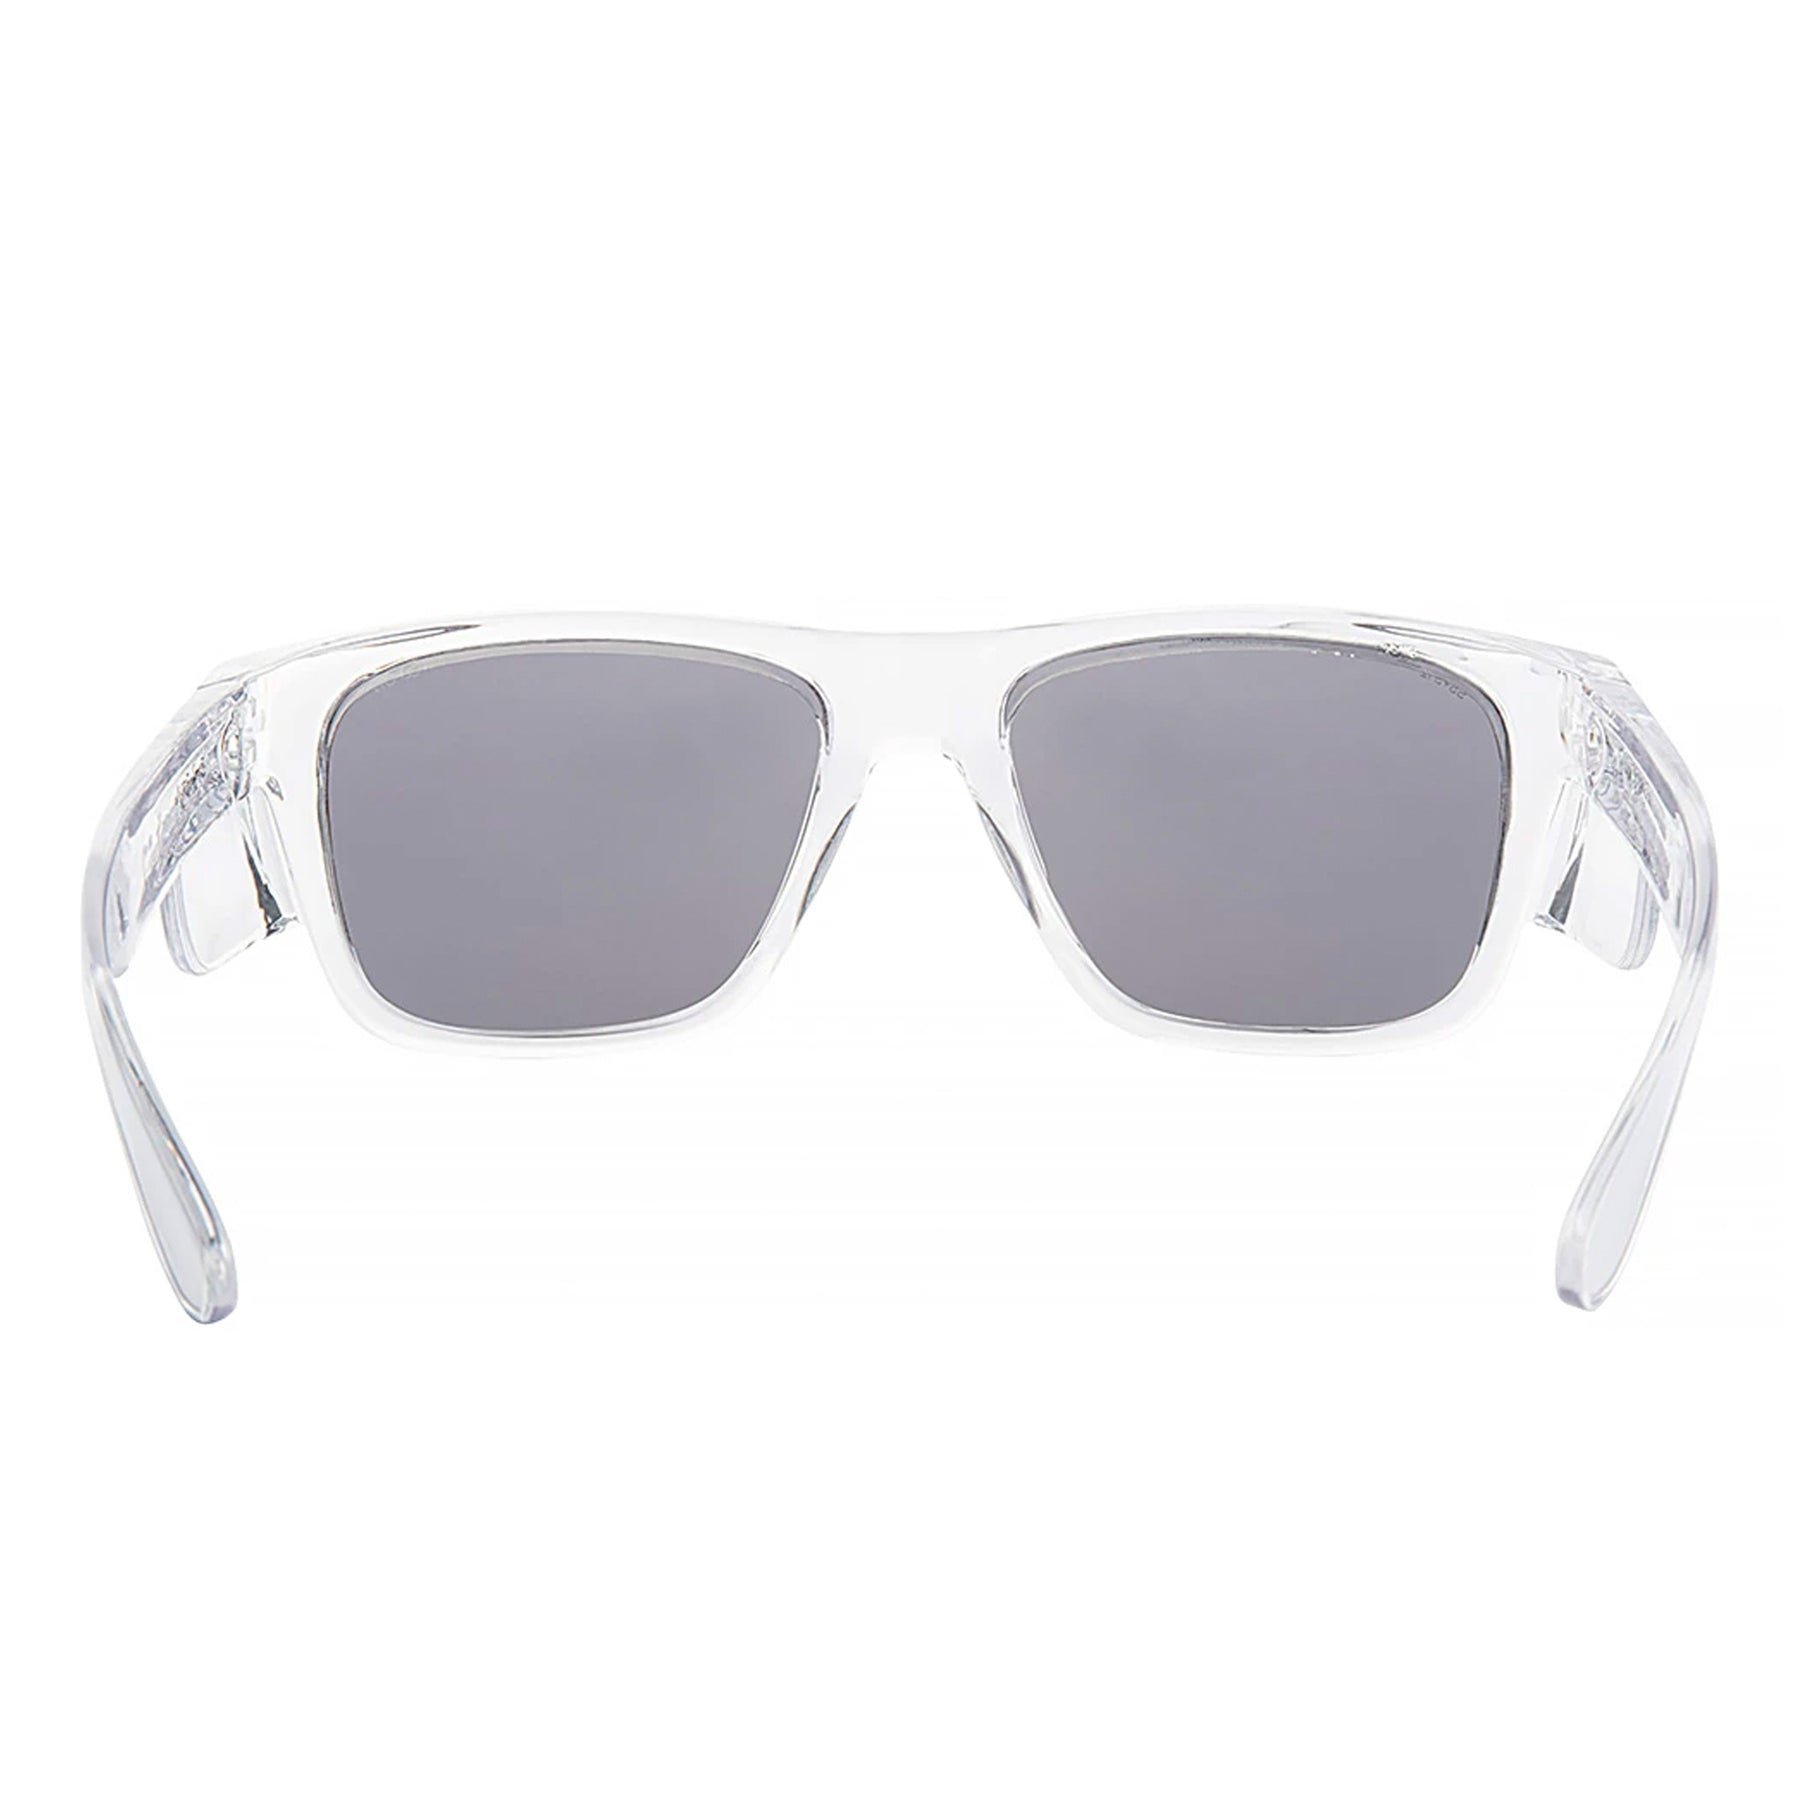 safe style fusions clear frame glasses with polarised lens